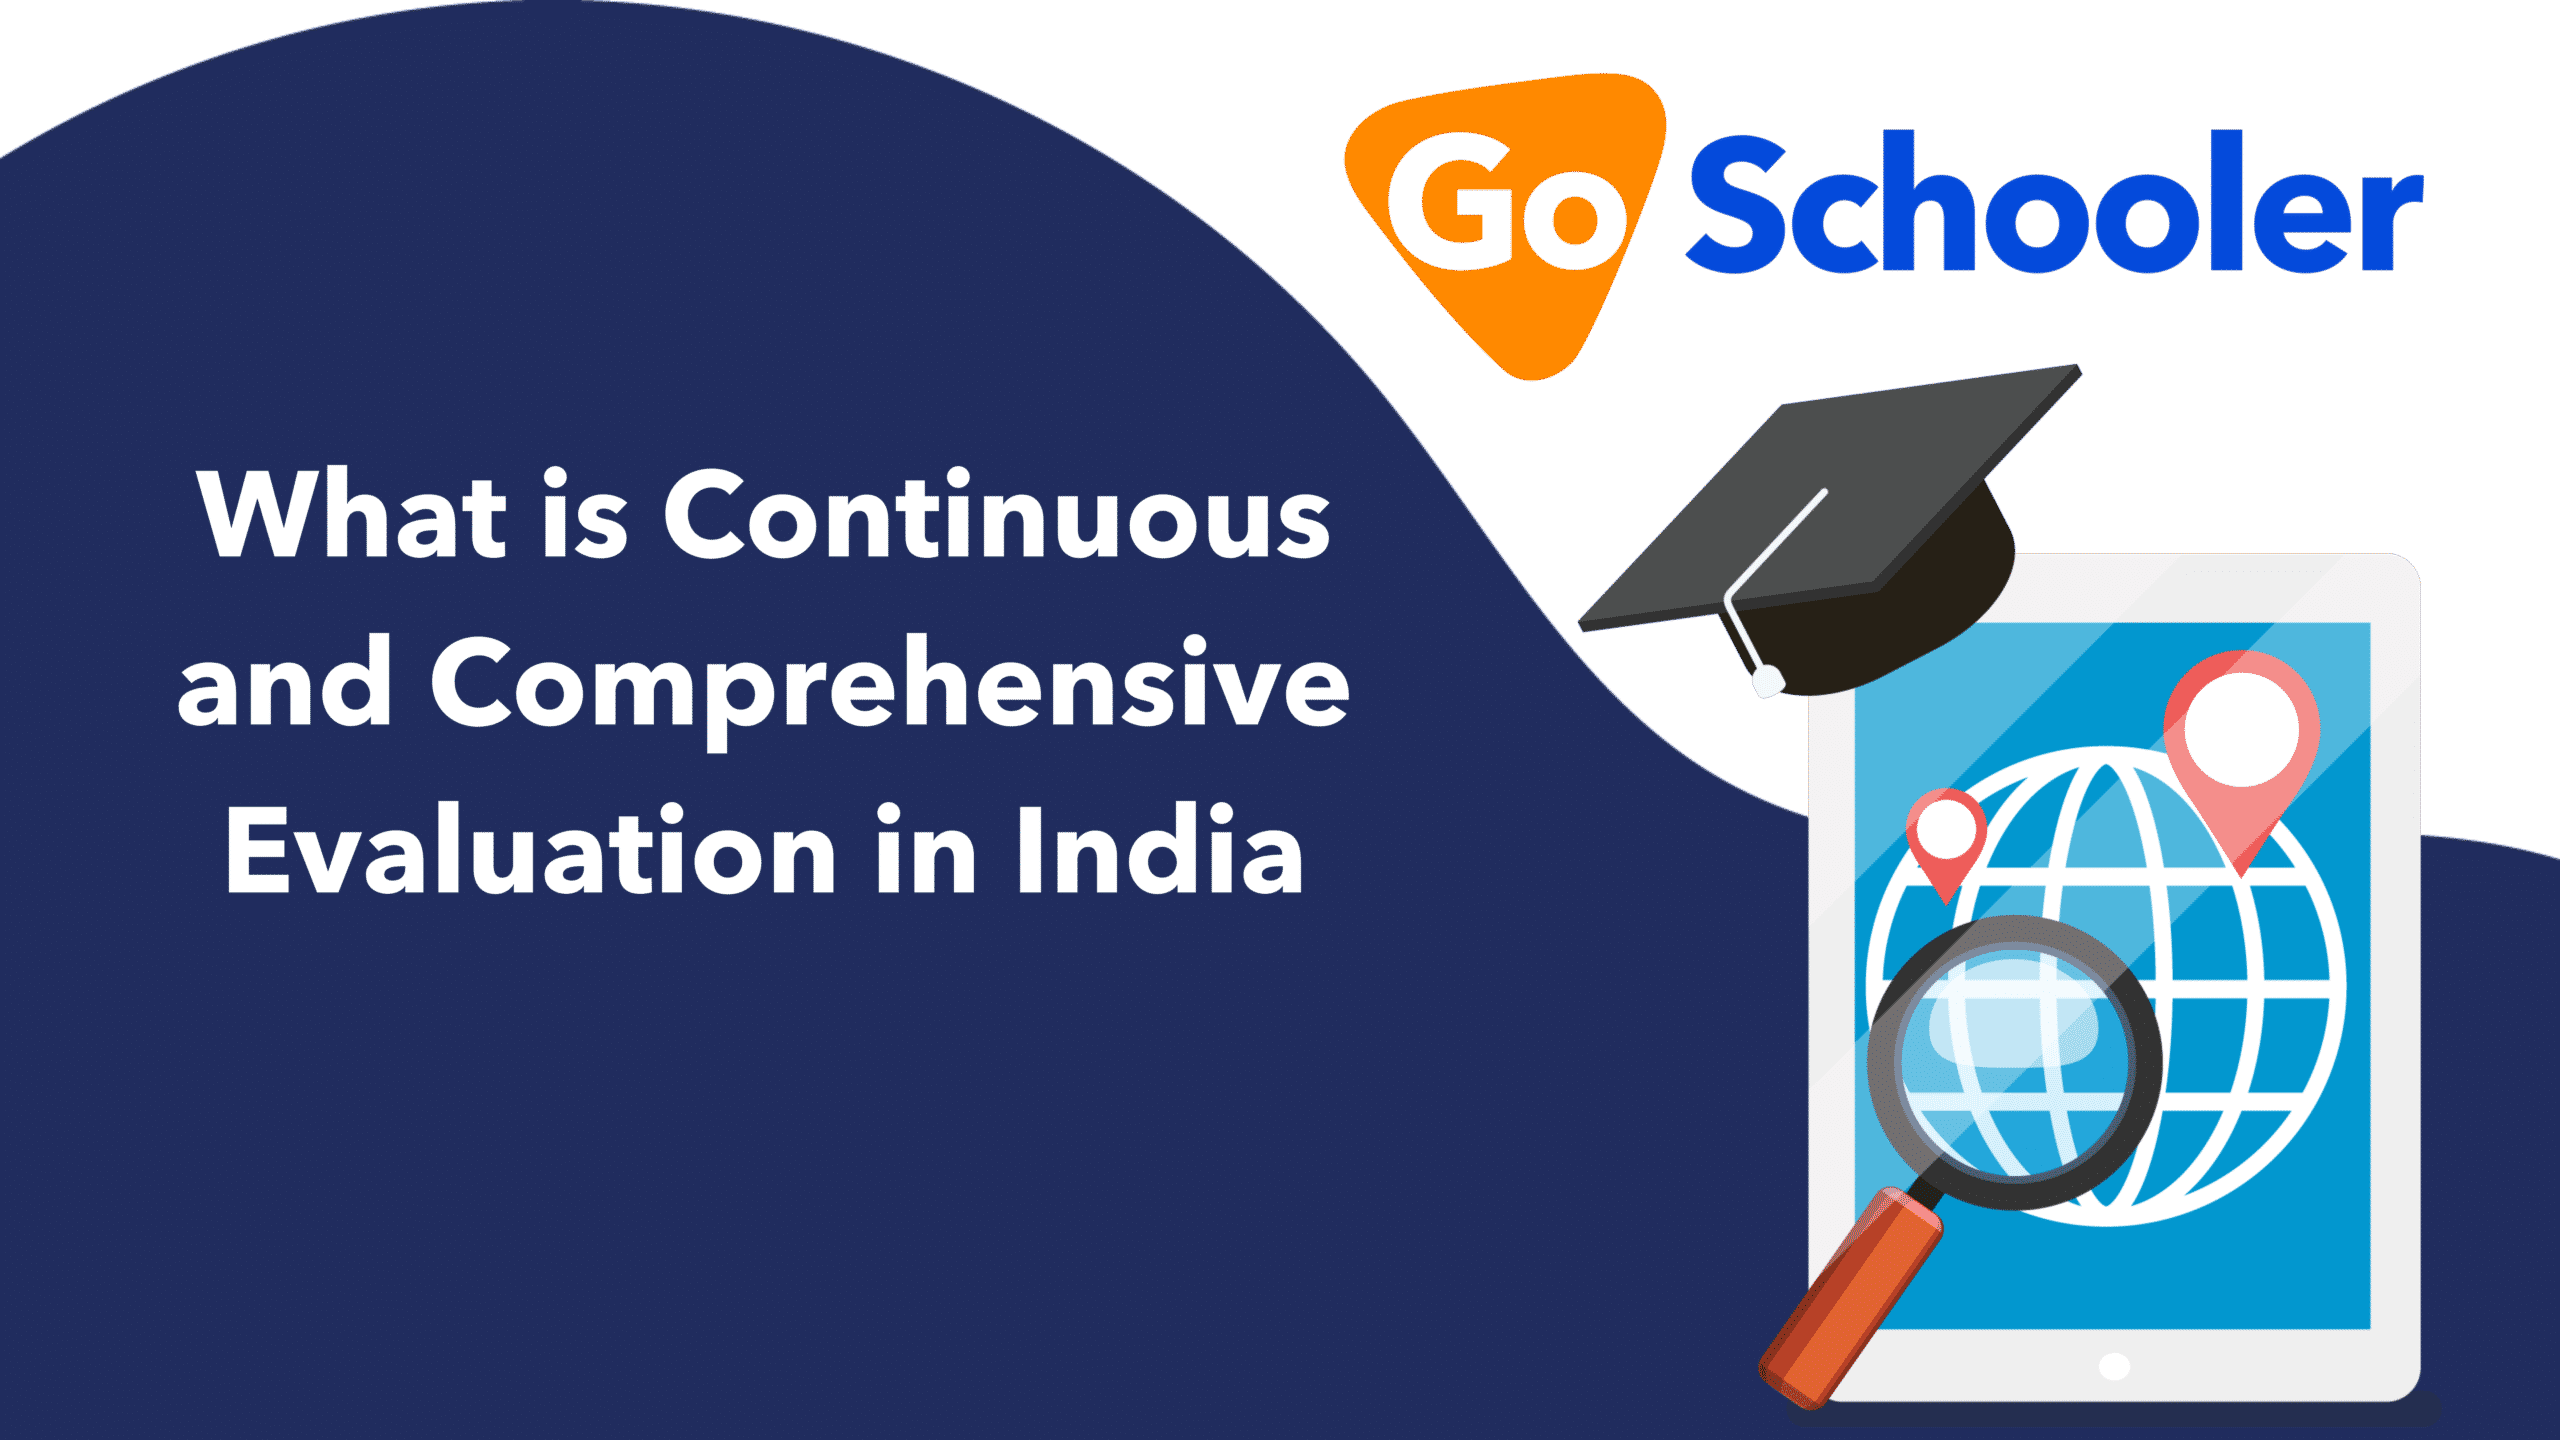 What is Continuous and Comprehensive Evaluation in India